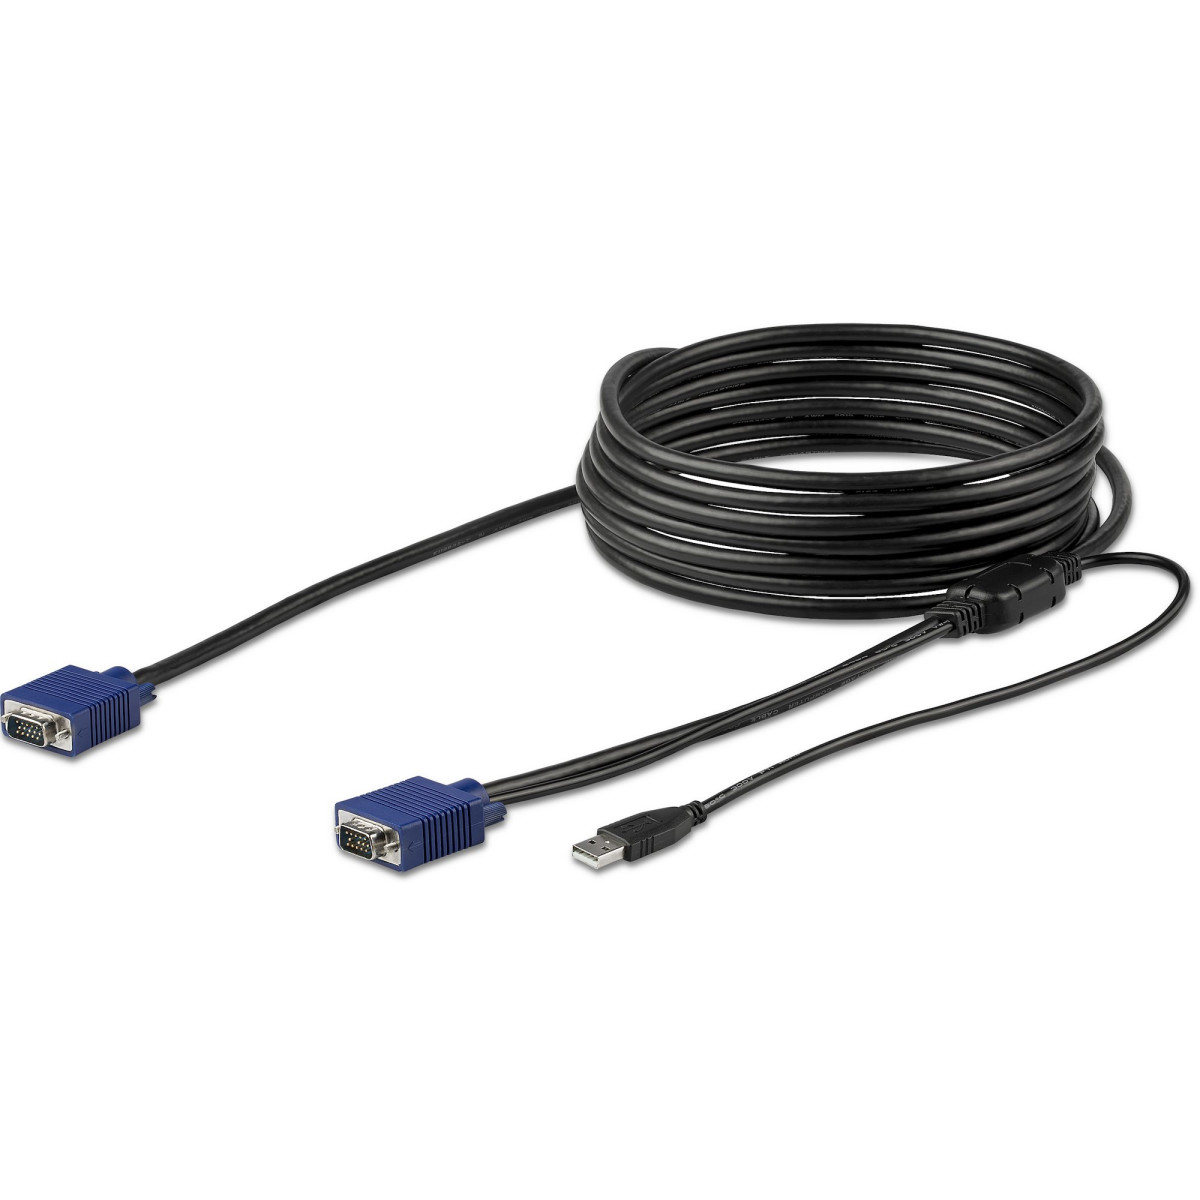 KVM Cable - 15ft Rackmount Console Cable